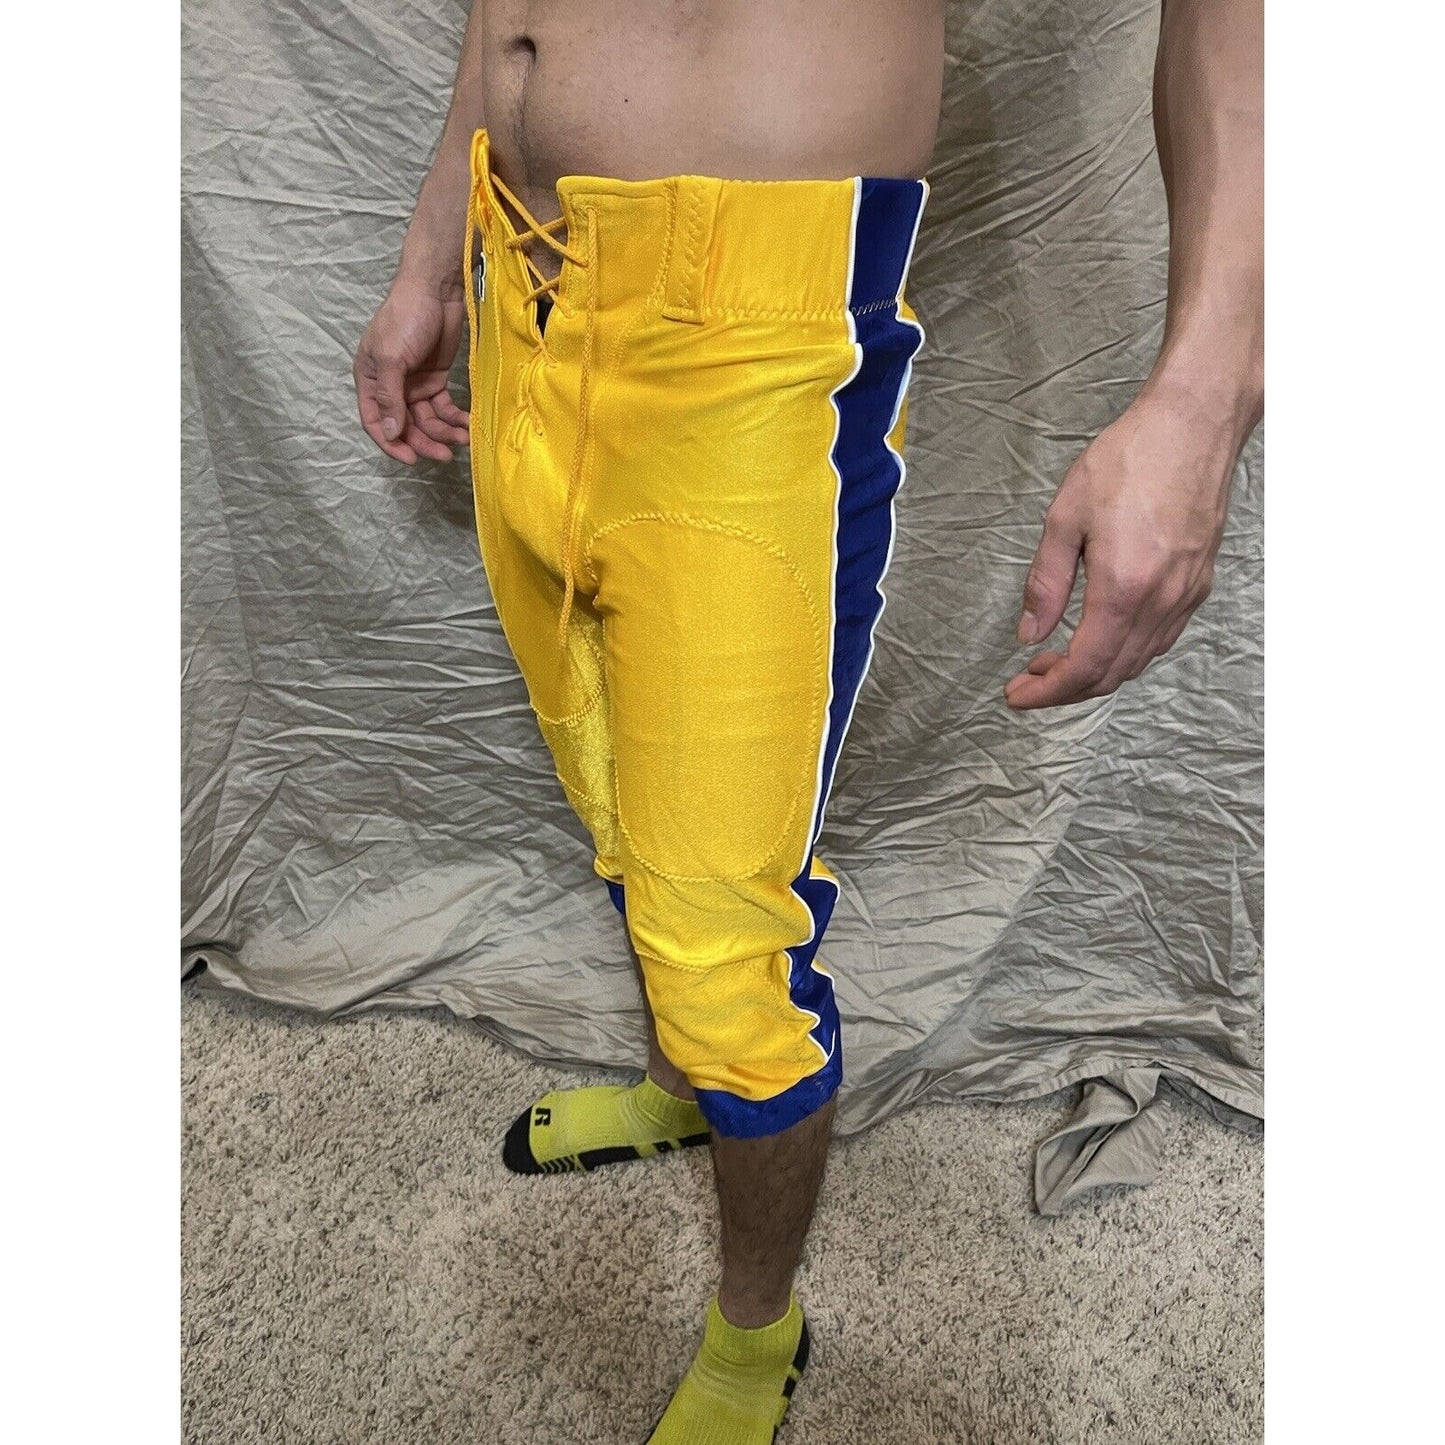 men's gold/yellow/blue russell athletics size 34 football pants